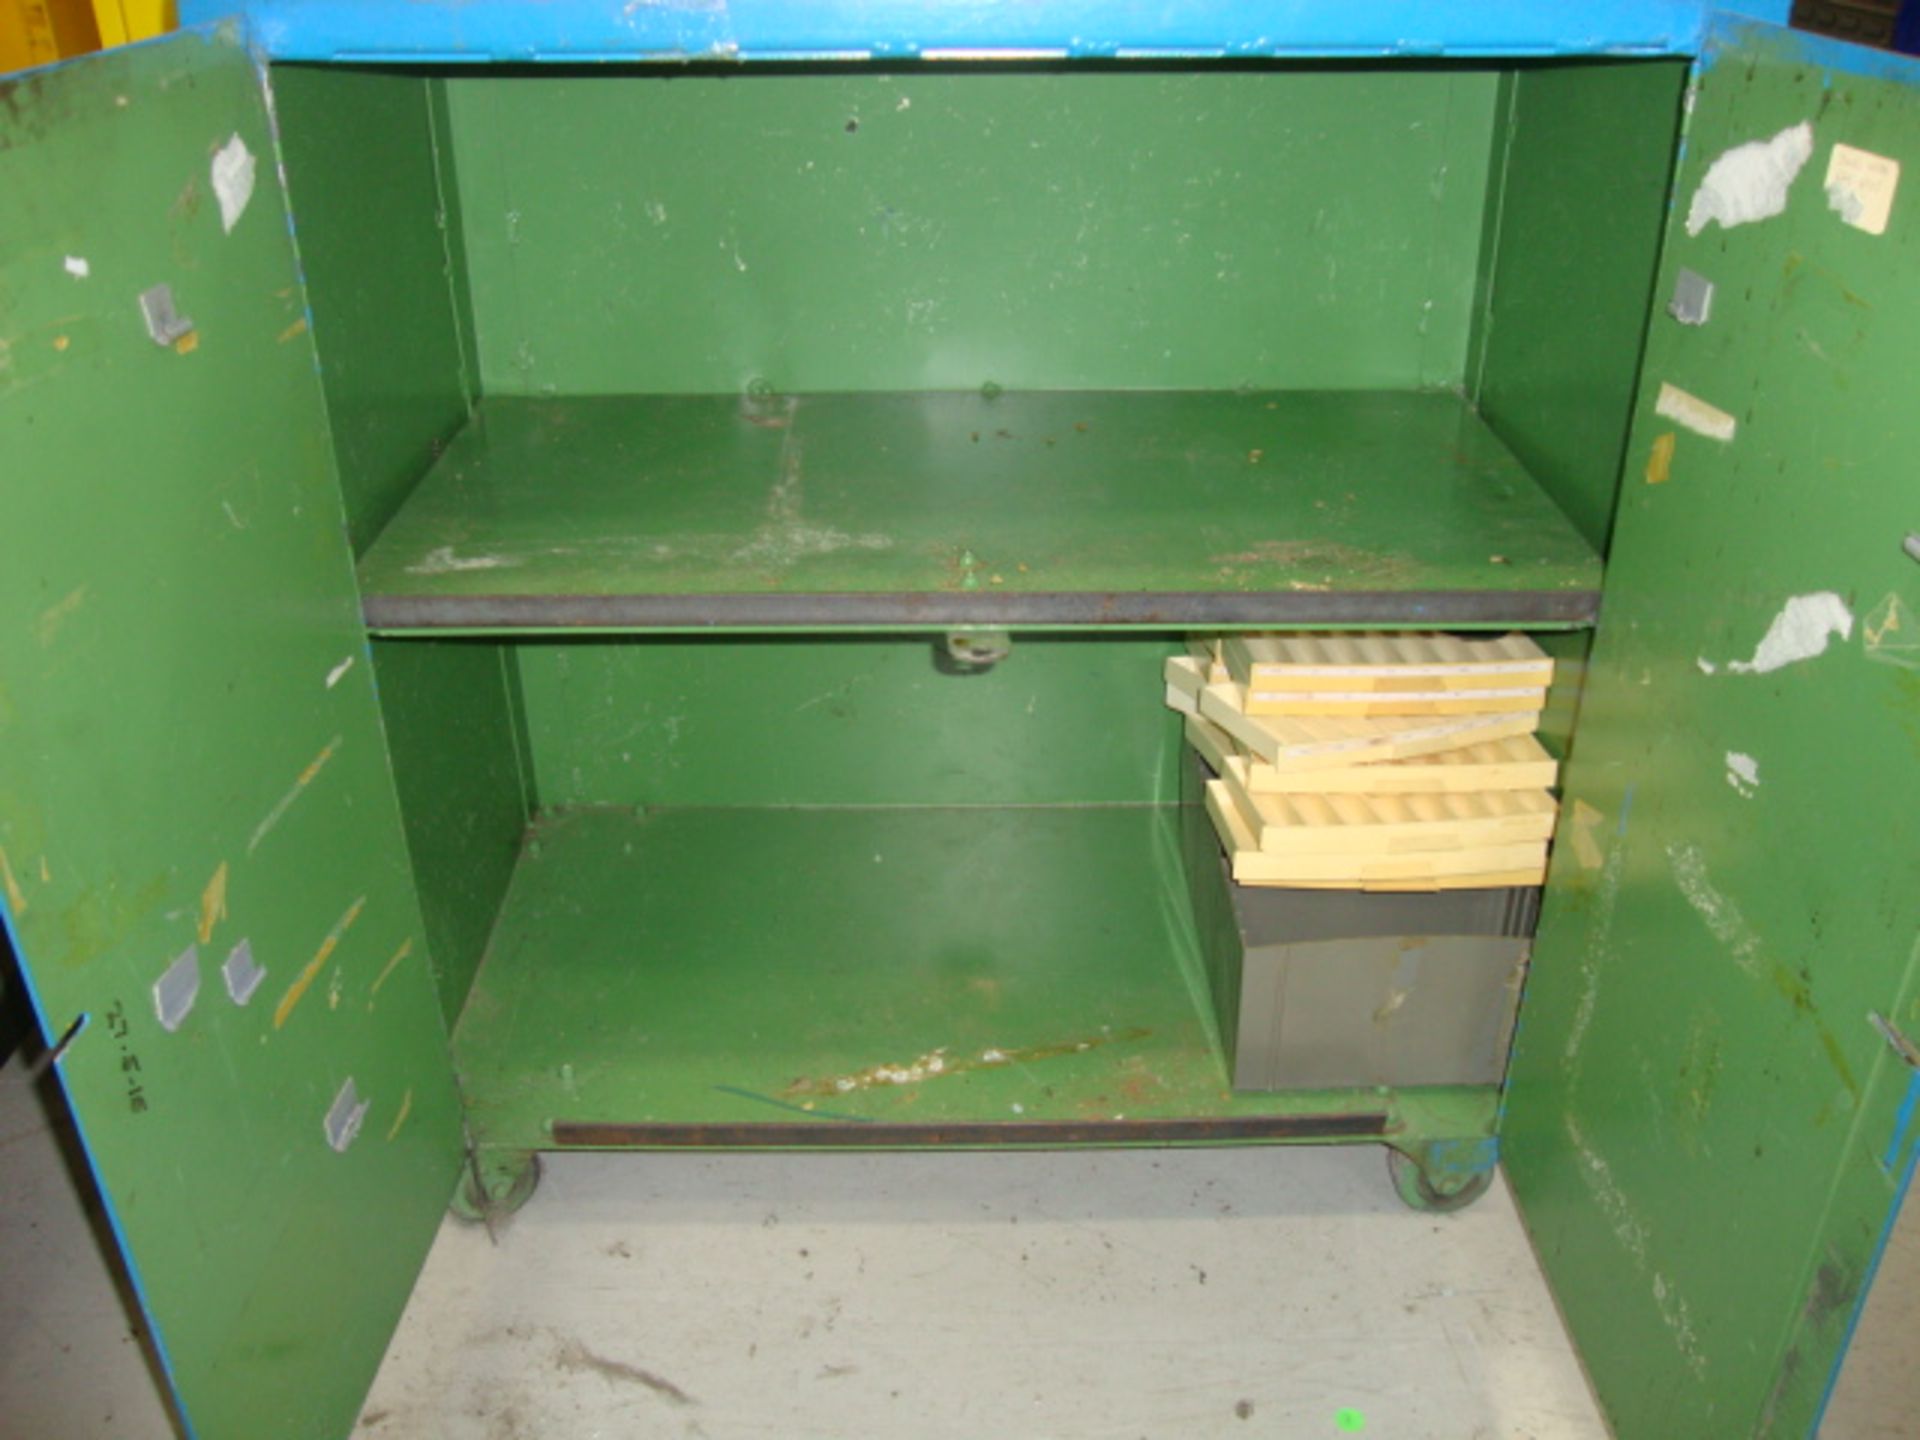 HD Rolling Cabinet, approx. 32" x 18" x 34" tall - Image 2 of 2